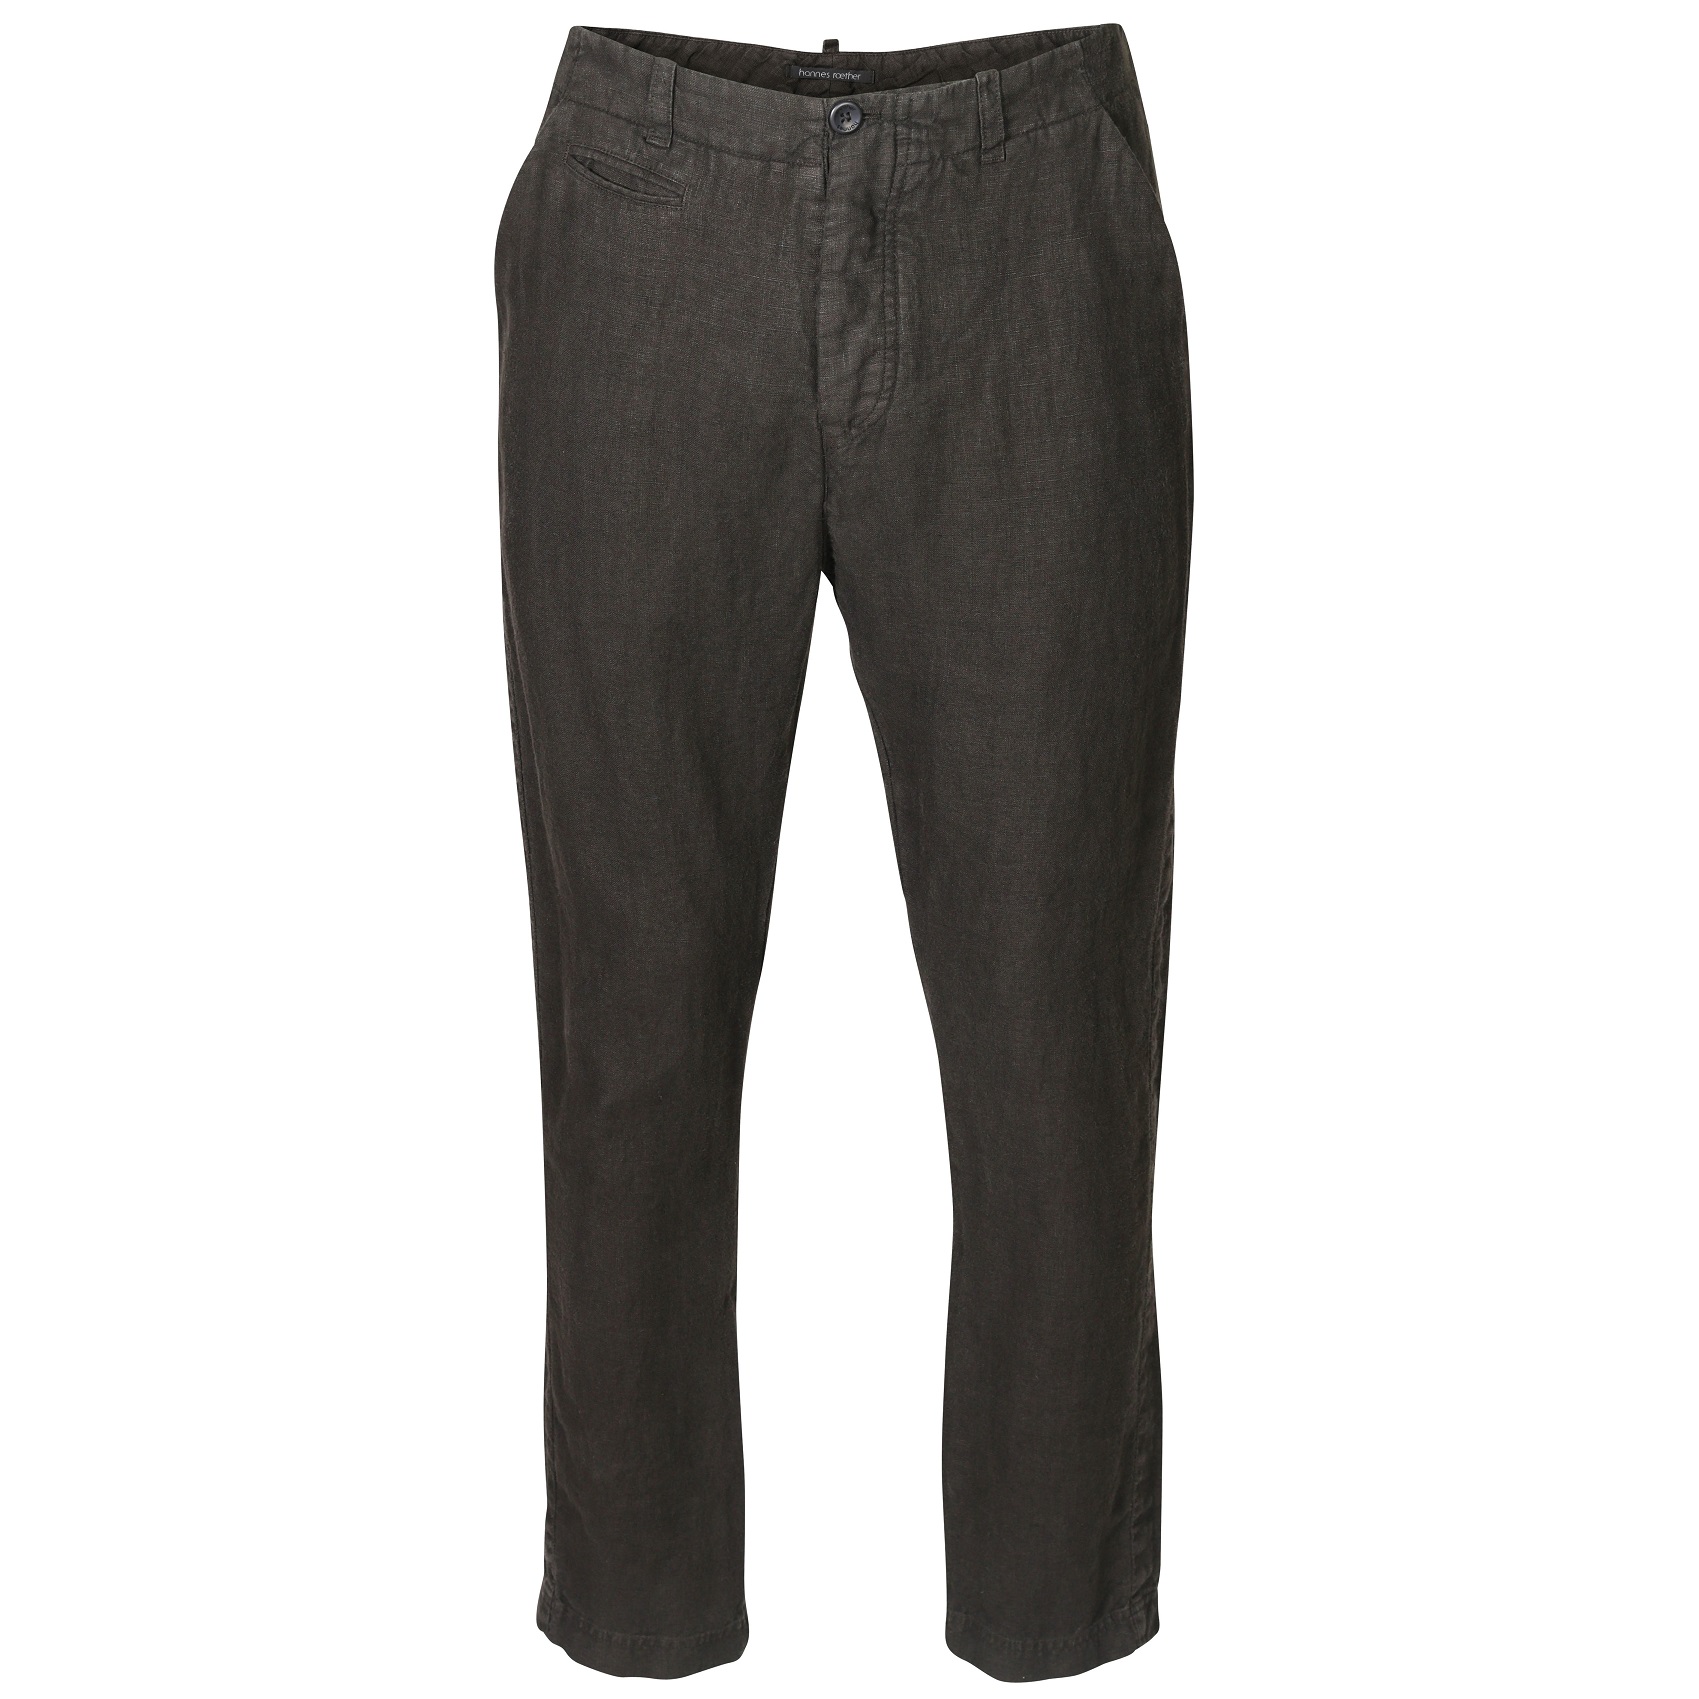 HANNES ROETHER Linen Pant in Dark Olive XXL